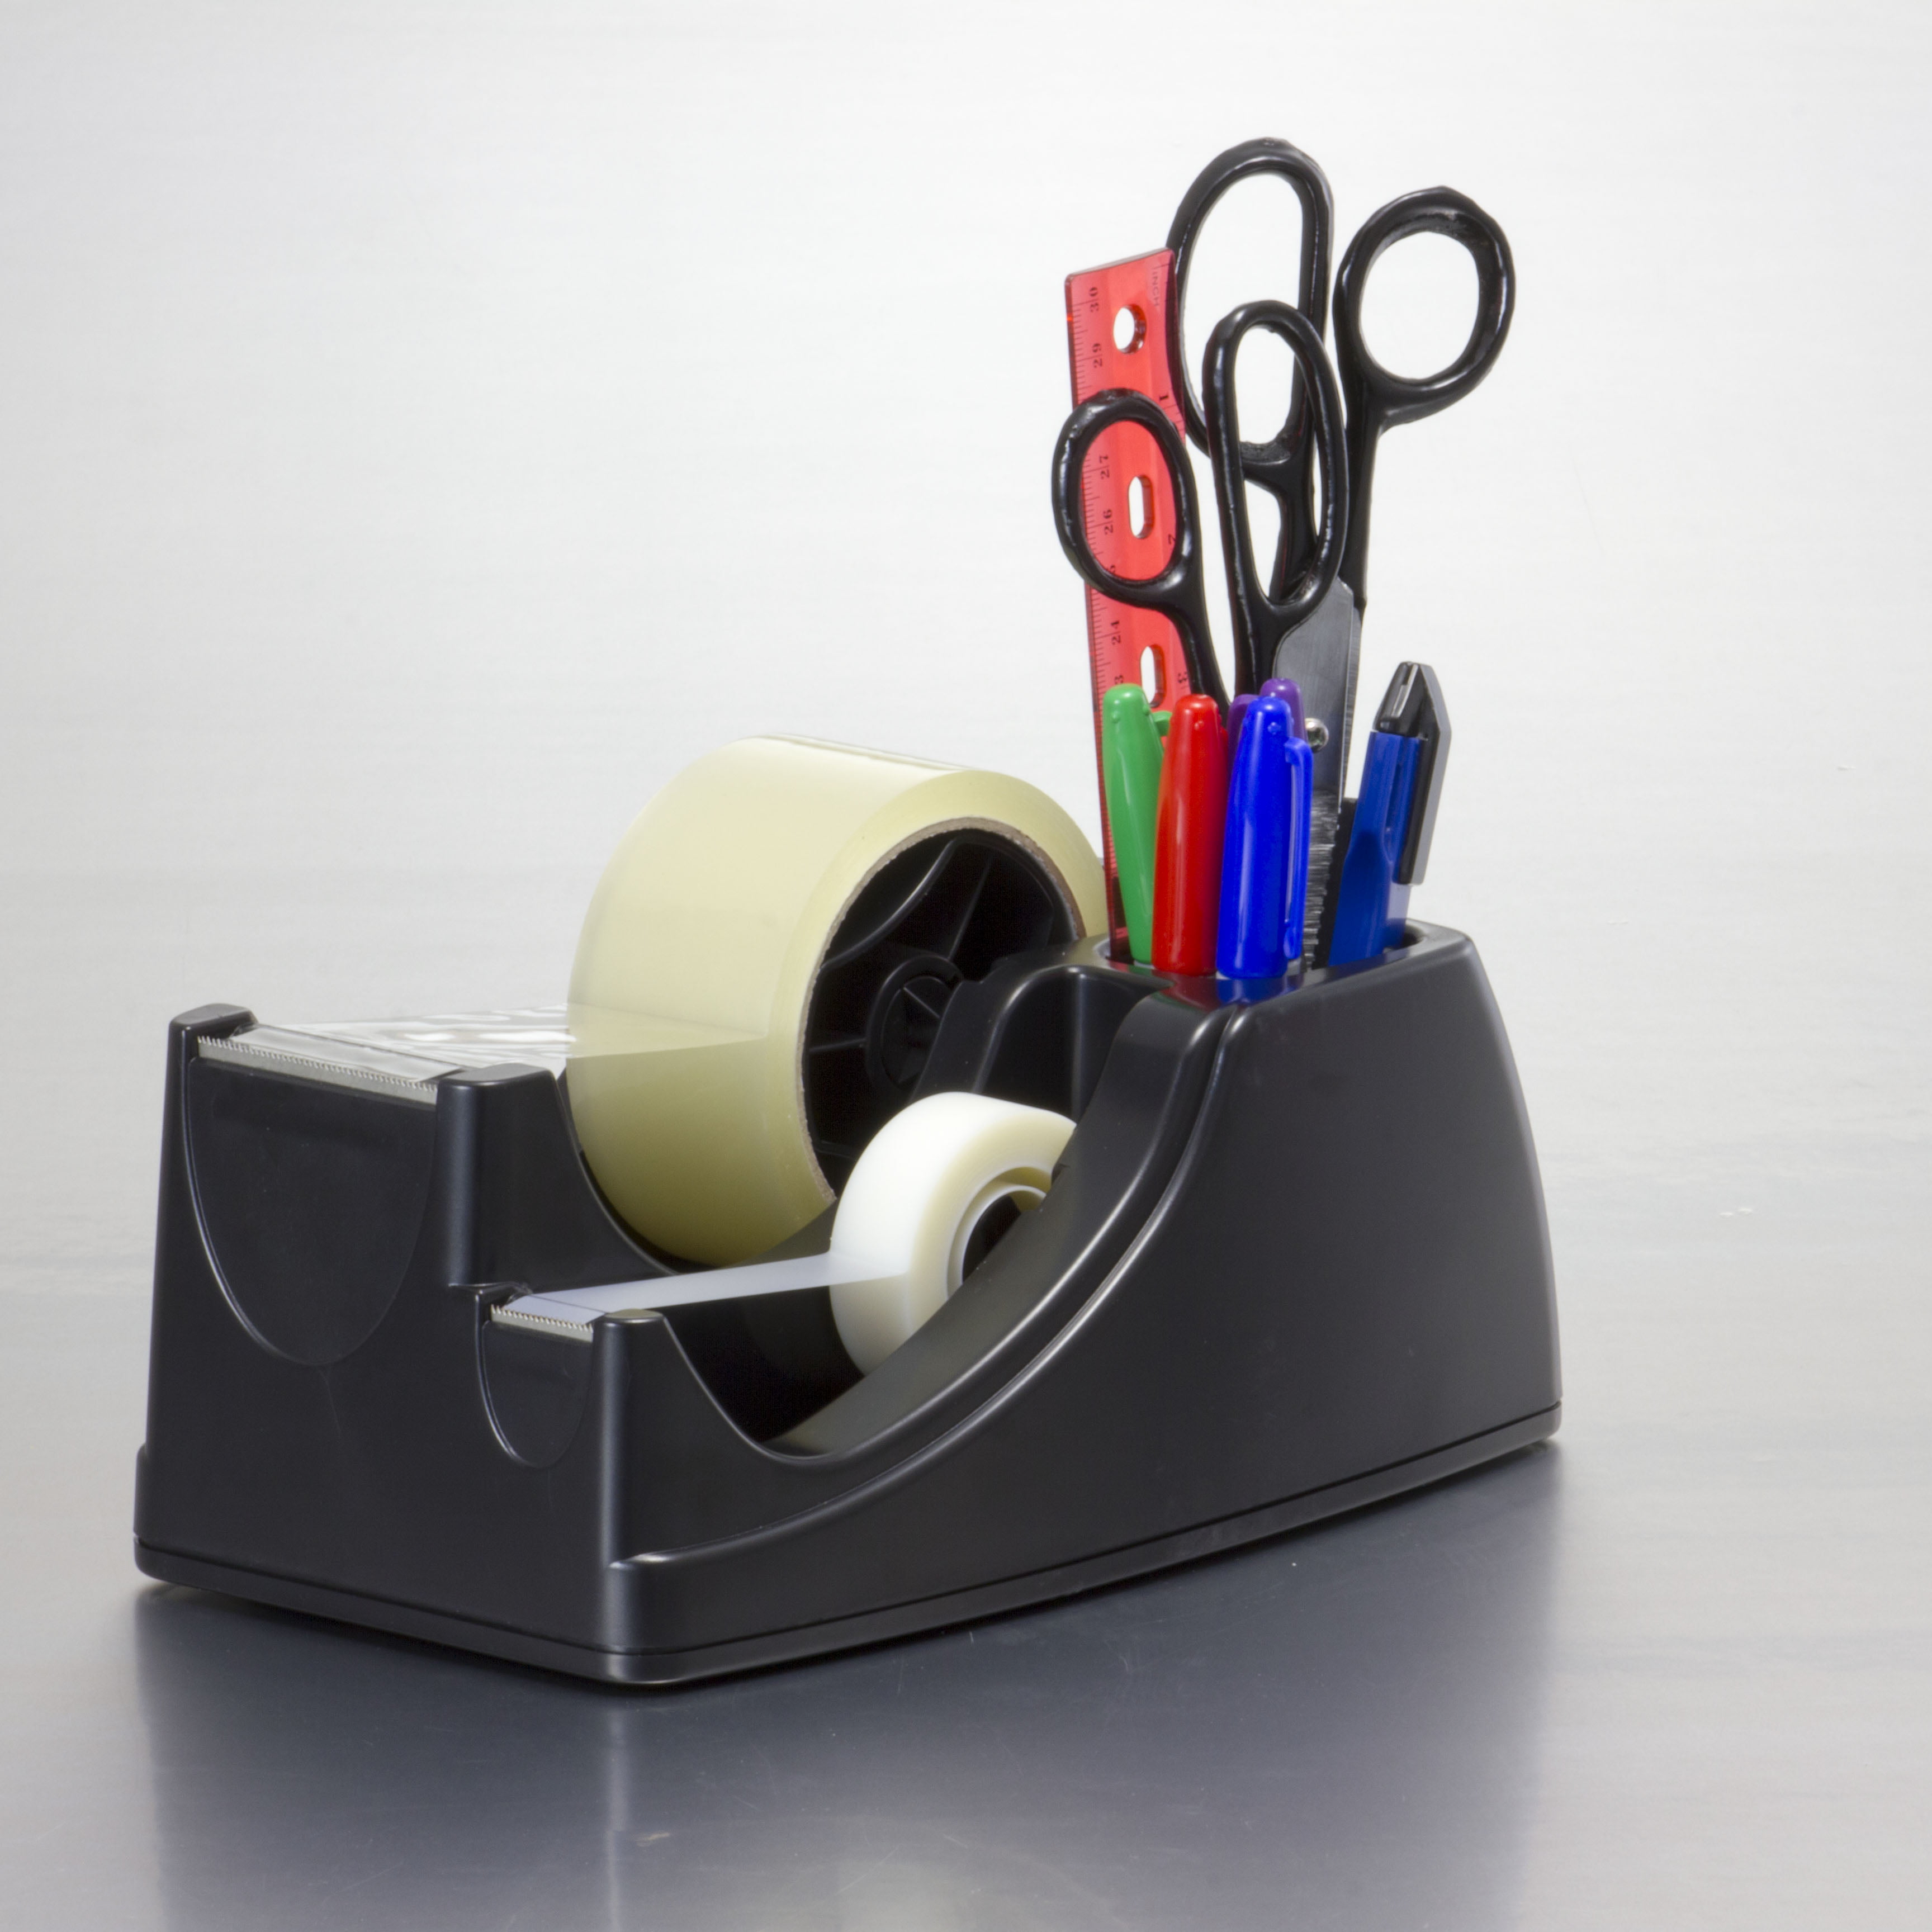 Black Recycled 2-in-1 Heavy Duty Tape Dispenser 1" and 3" Cores